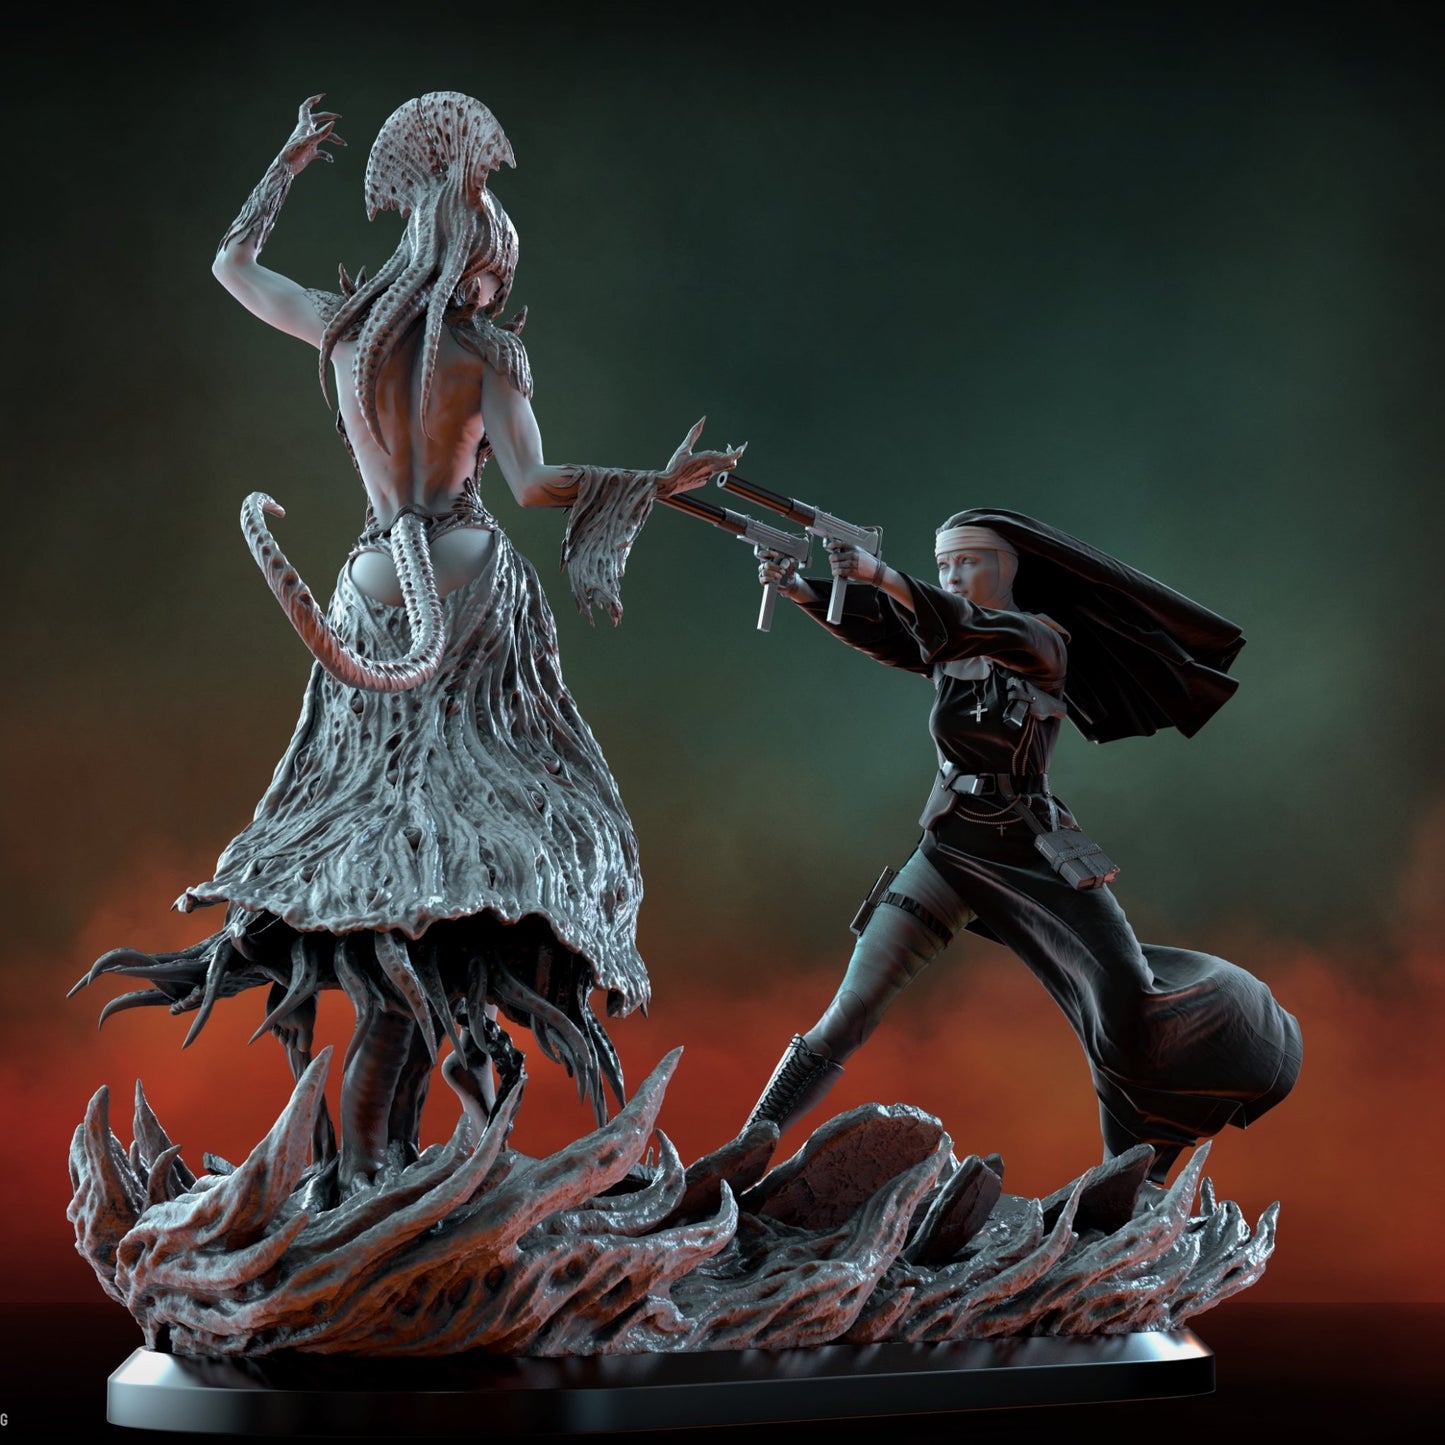 LADY SIN and SISTER MARY Diorama 3D Printed Miniature Fanart by Ritual Casting - Deus Spes Nostra diorama